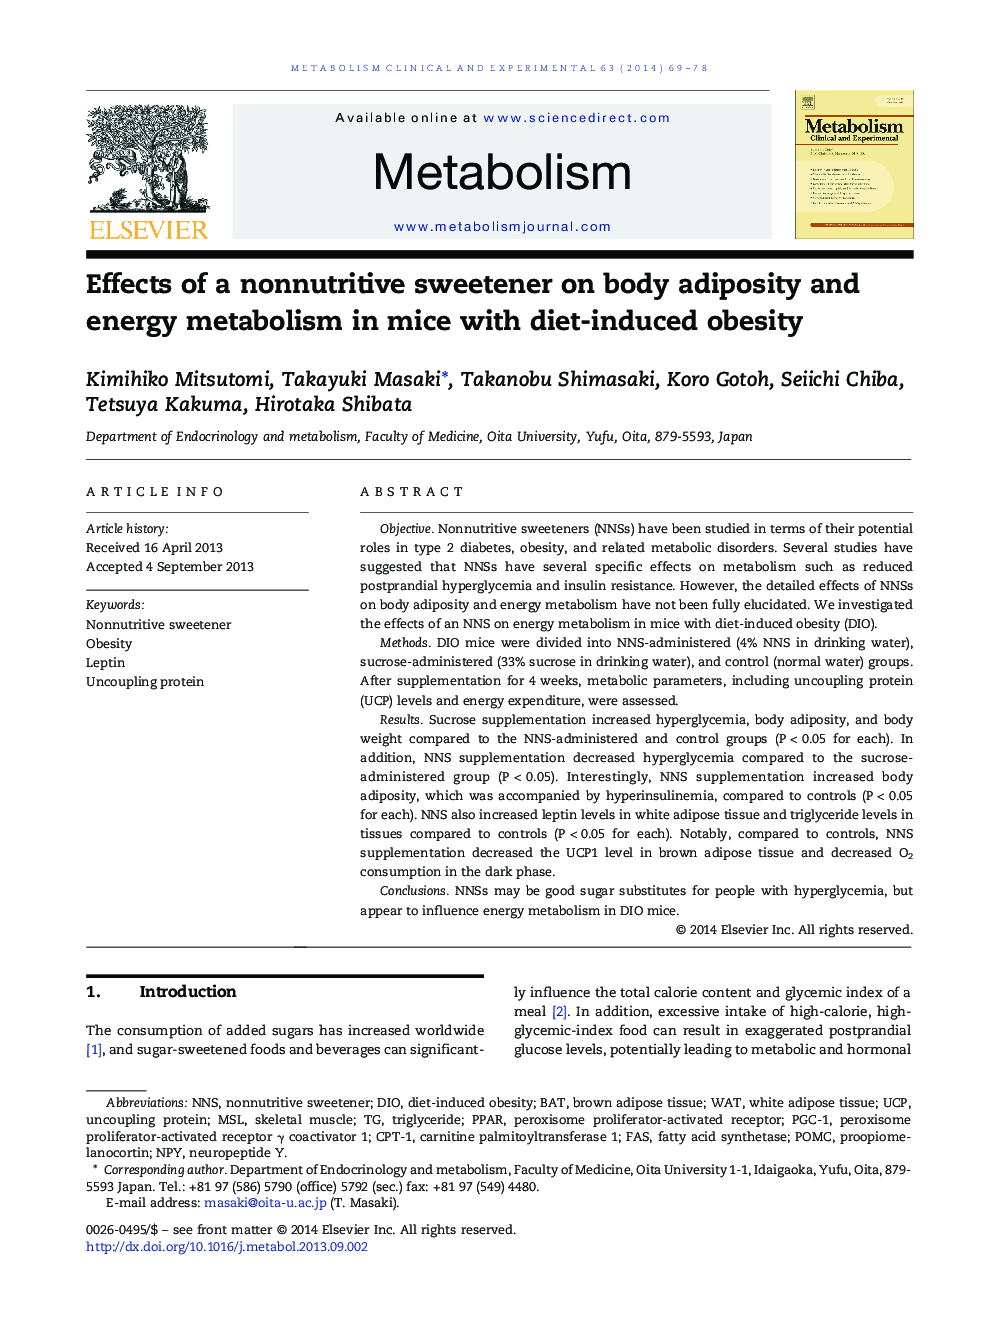 Effects of a nonnutritive sweetener on body adiposity and energy metabolism in mice with diet-induced obesity